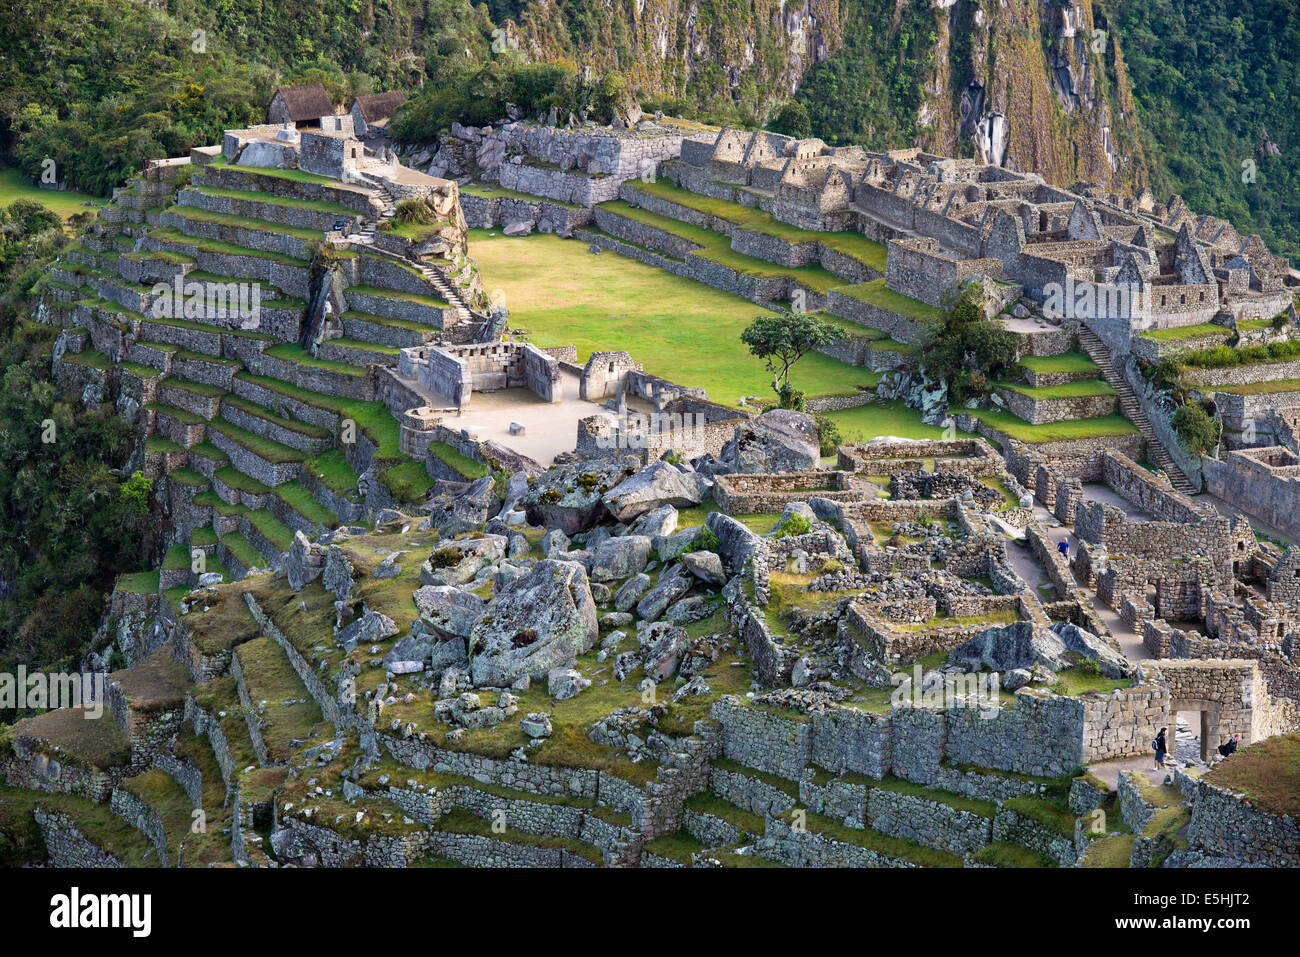 Ruins, the Inca city of Machu Picchu with the main square or Plaza Principal and terraces, UNESCO World Heritage Site Stock Photo